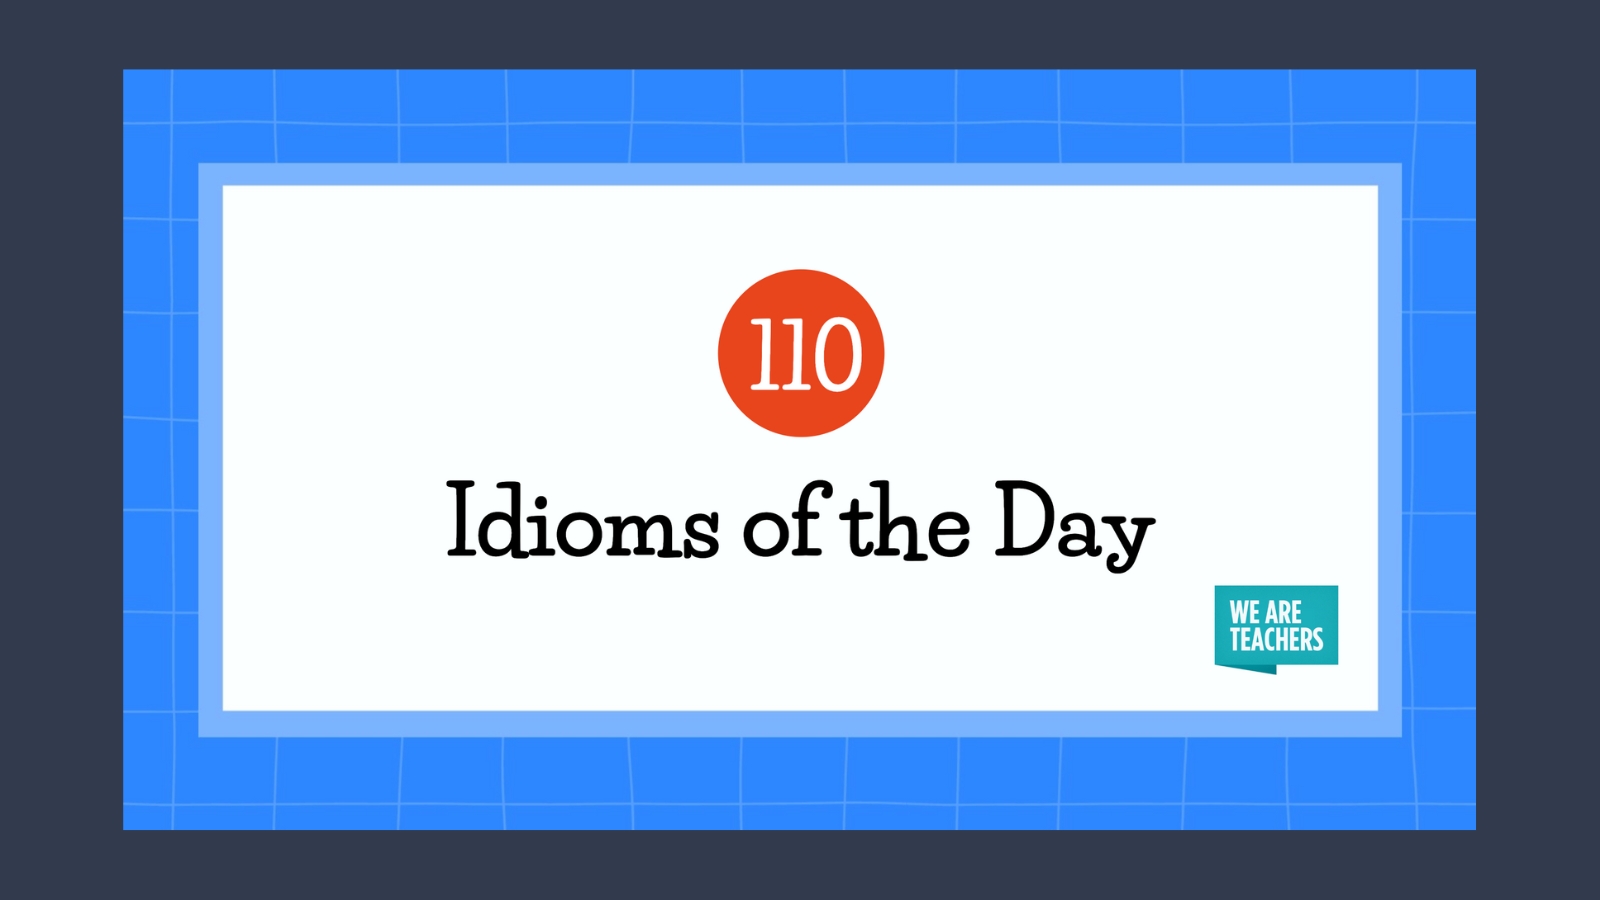 Text that says 110 Idioms of the Day with We Are Teachers logo